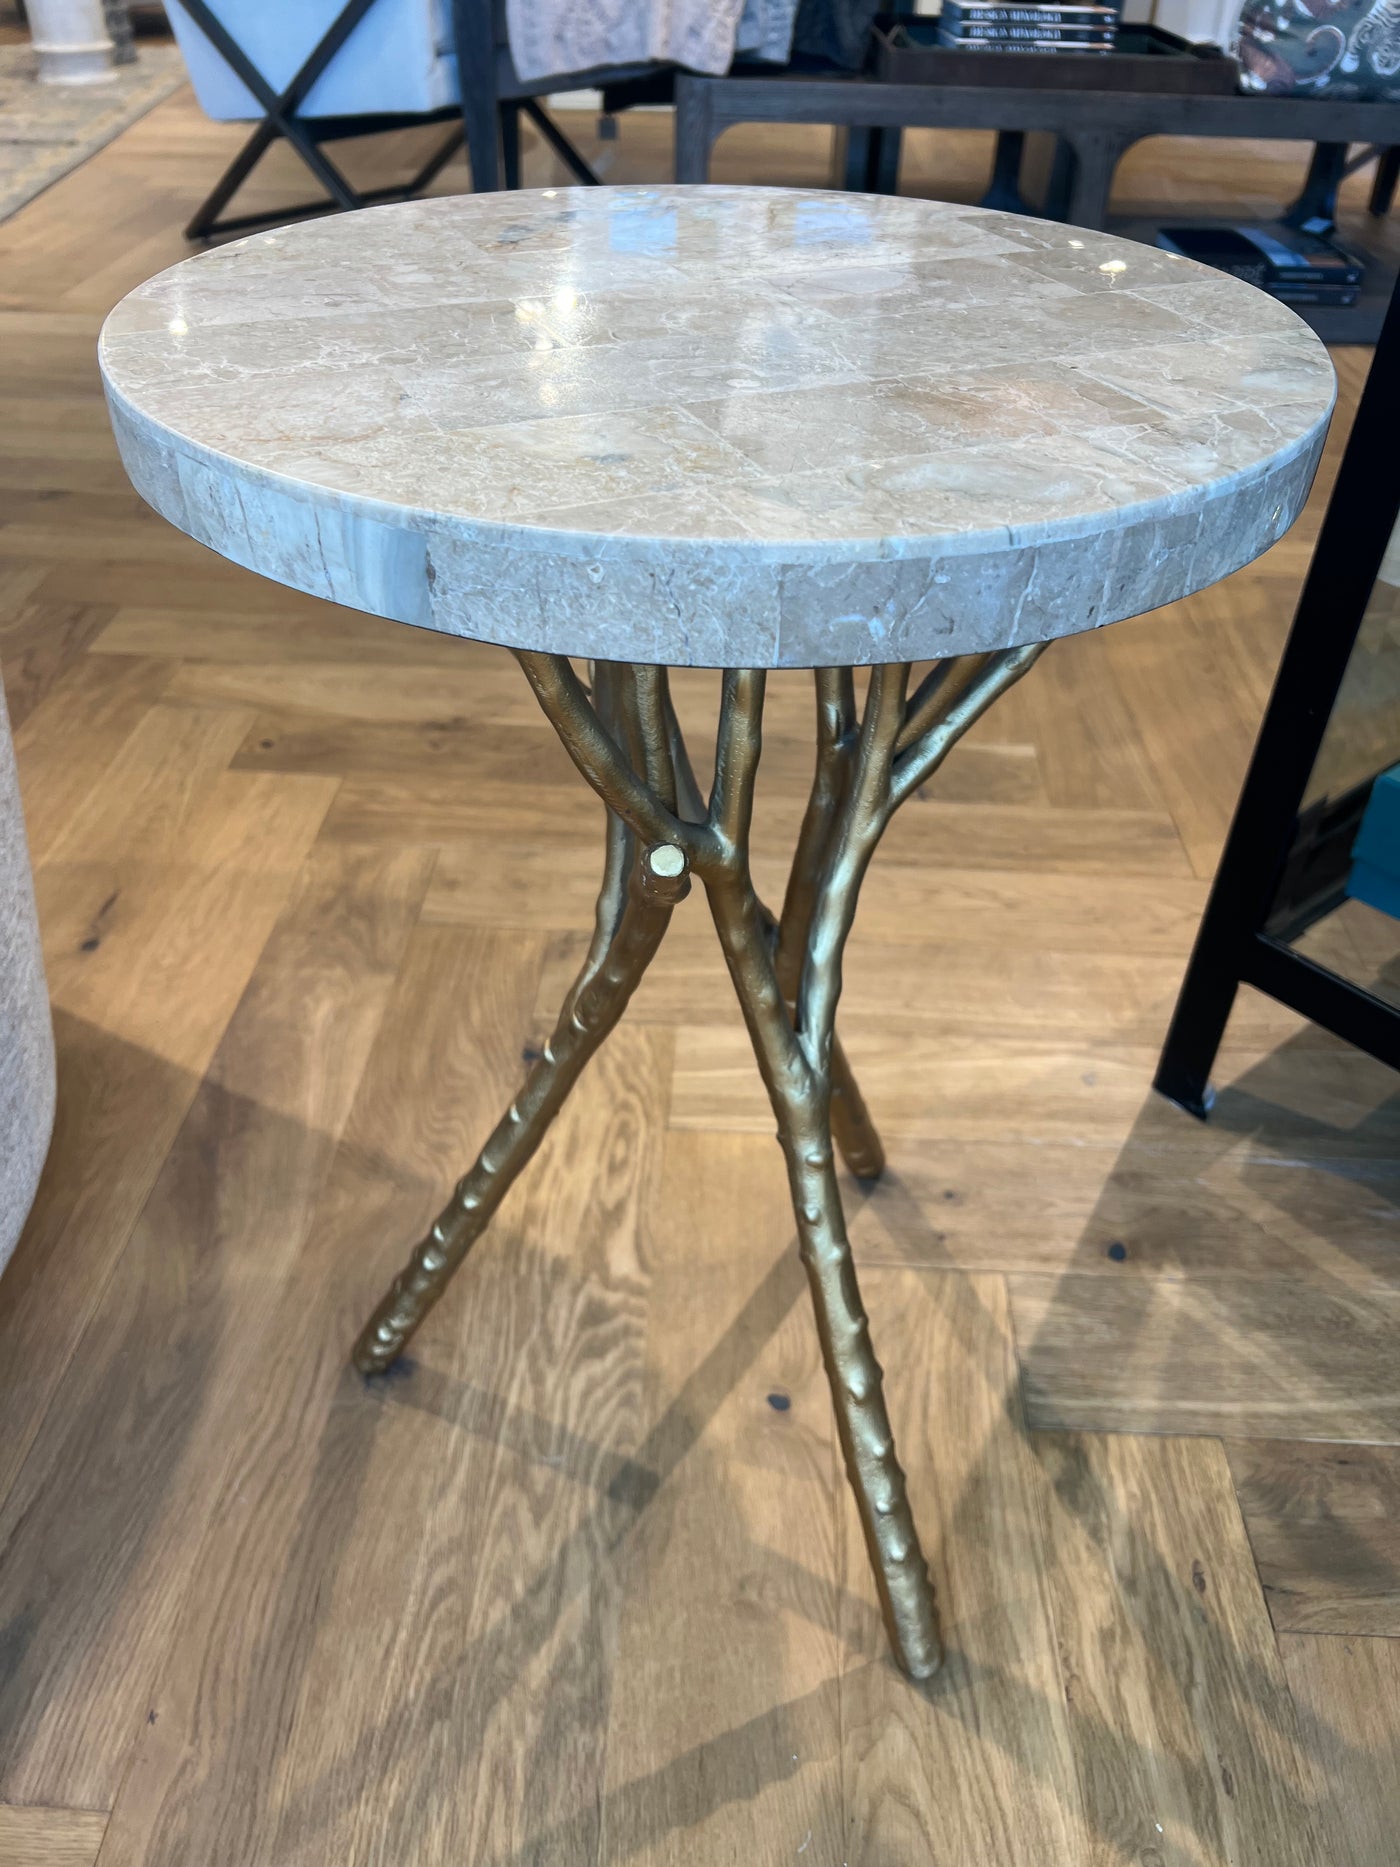 TABLE GOLD TWIG BASE GRAY MARBLE TOP